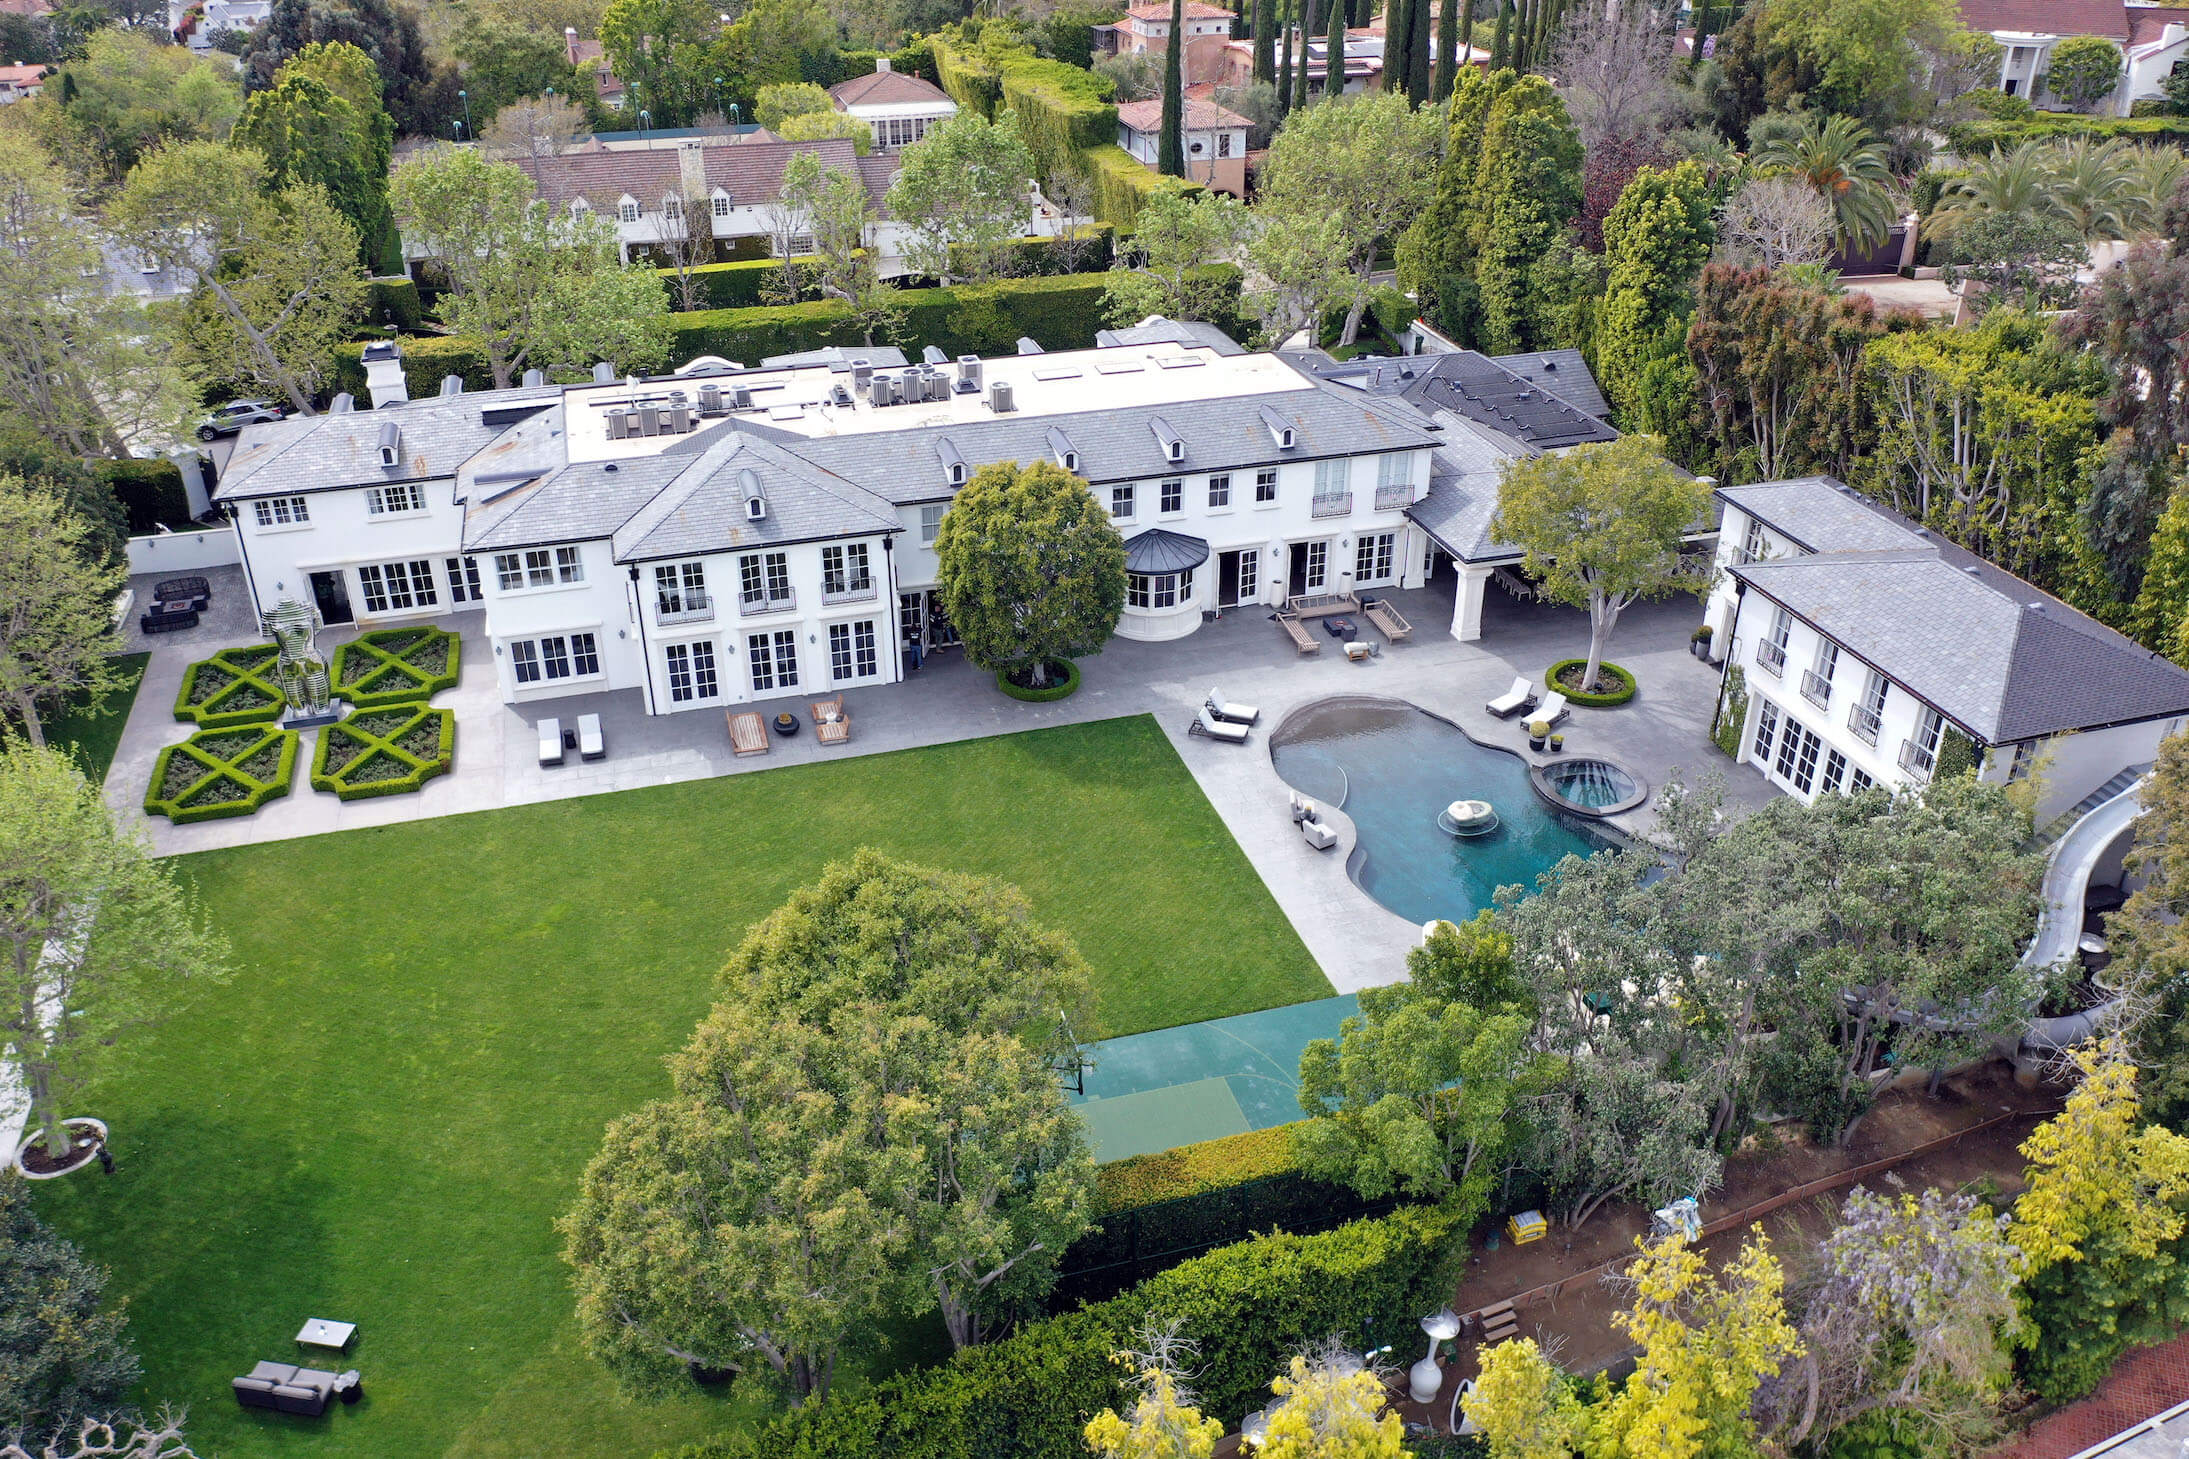 Inside P. Diddy’s $40 Million Los Angeles Home Raided by Homeland Security